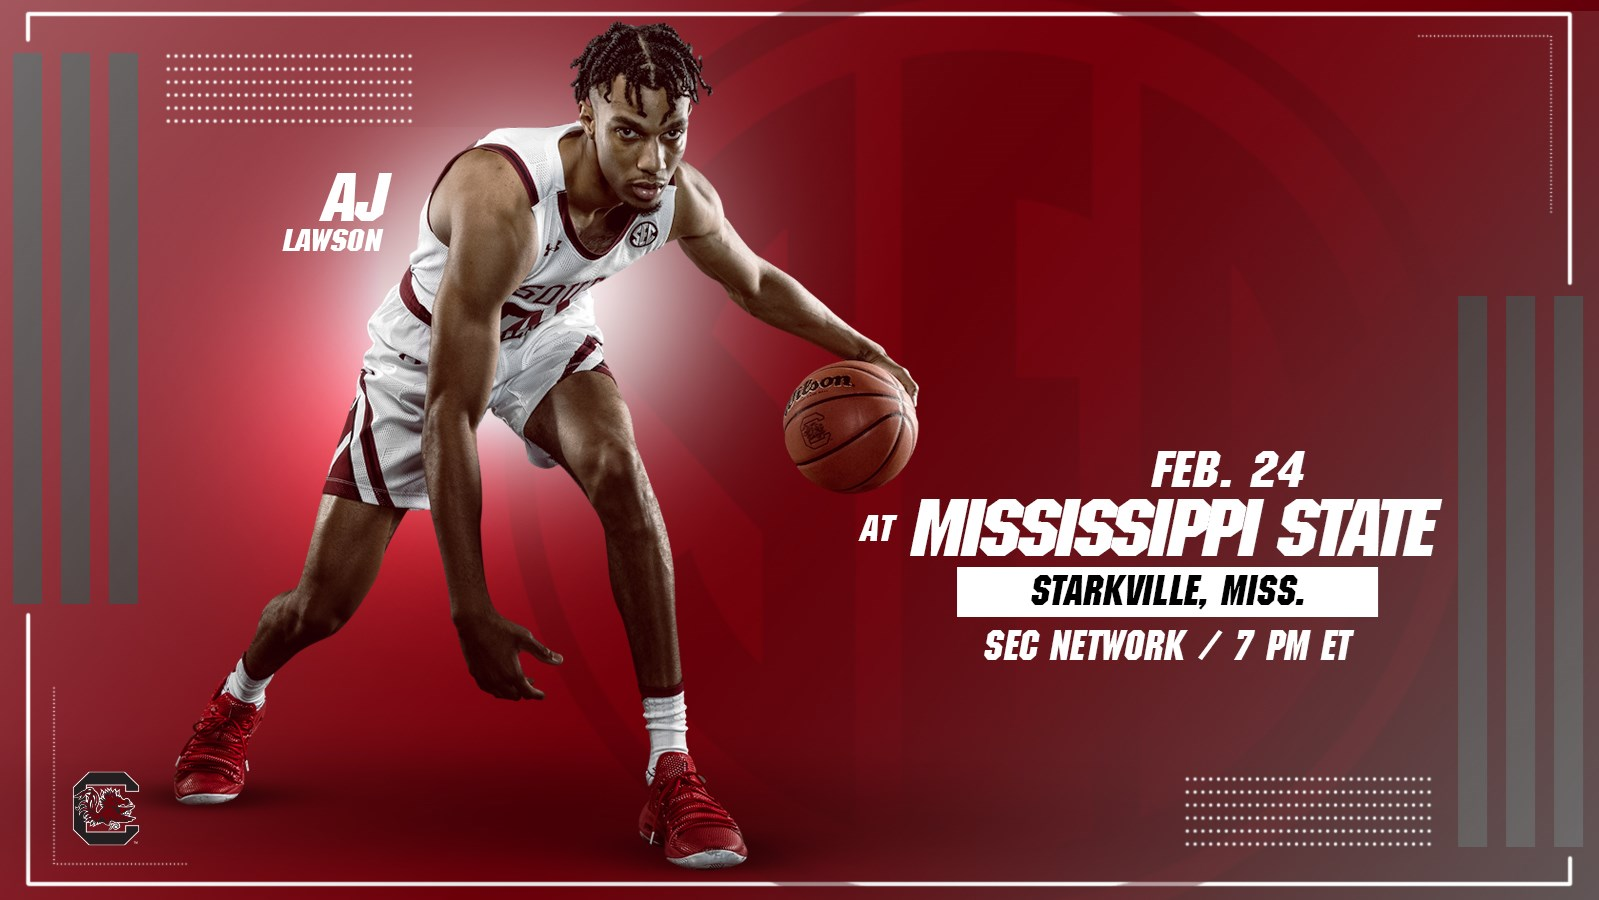 Gamecocks On The Road At Mississippi State Wednesday